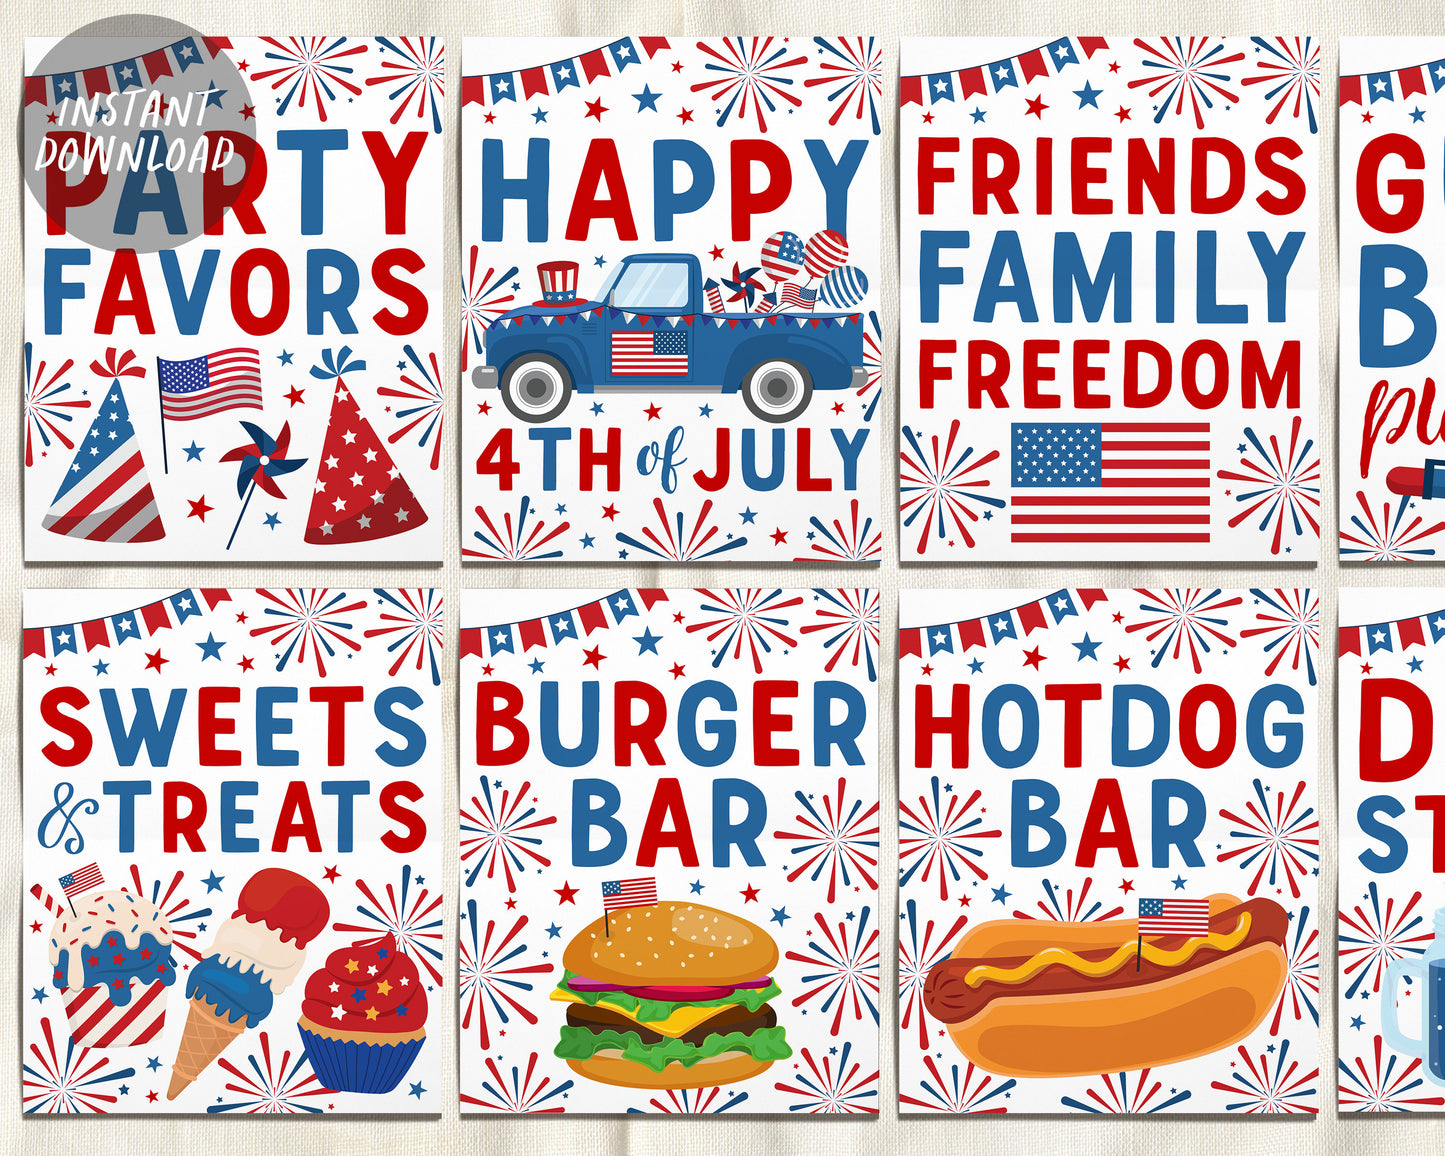 4th of July Party Signs BUNDLE, Fourth of July Decorations, Independence Day Patriotic BBQ Birthday Baby Shower Decor Printable, Burger Bar